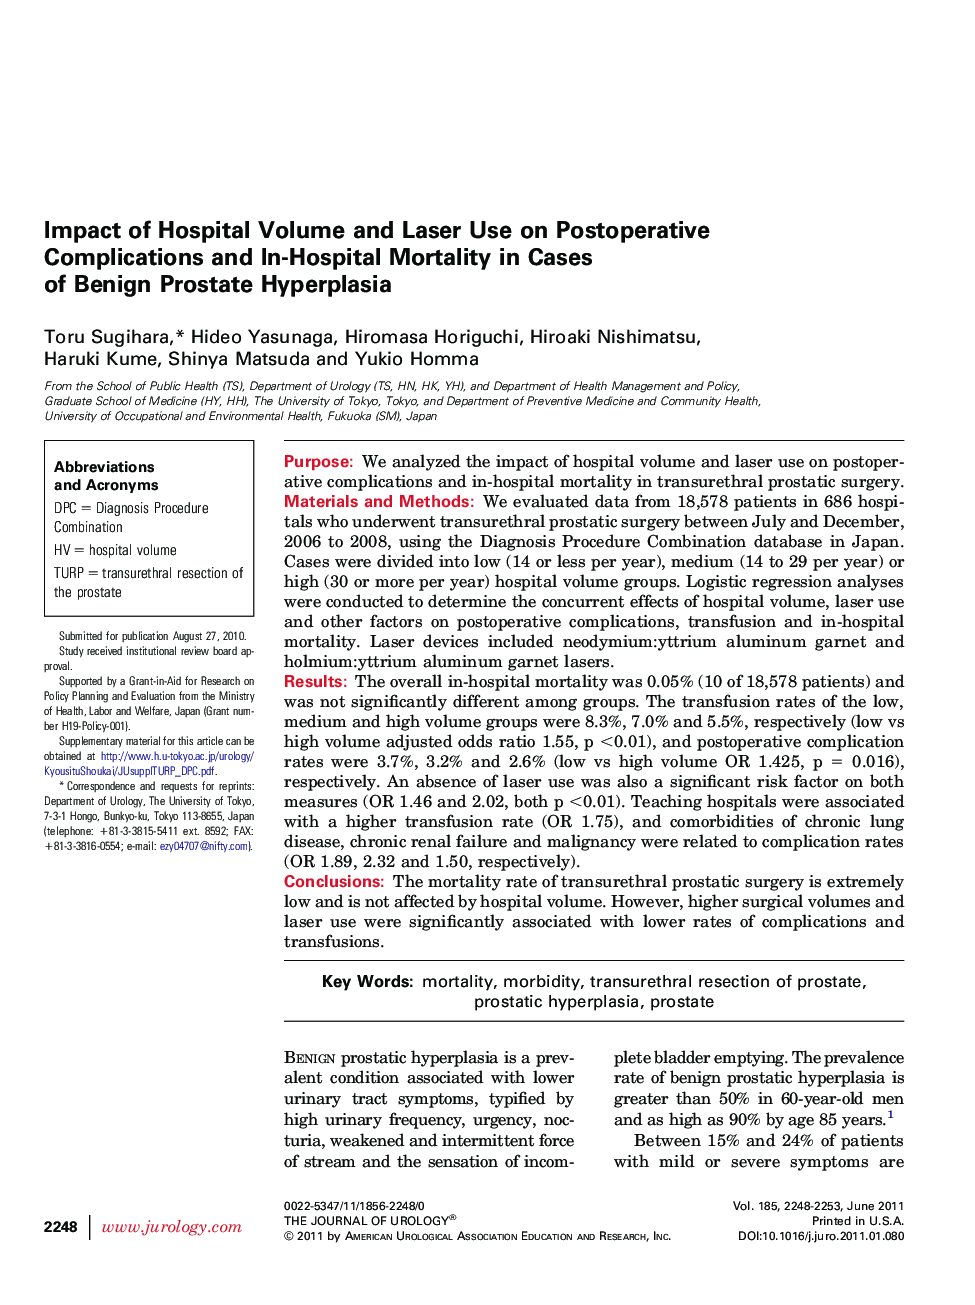 Impact of Hospital Volume and Laser Use on Postoperative Complications and In-Hospital Mortality in Cases of Benign Prostate Hyperplasia 